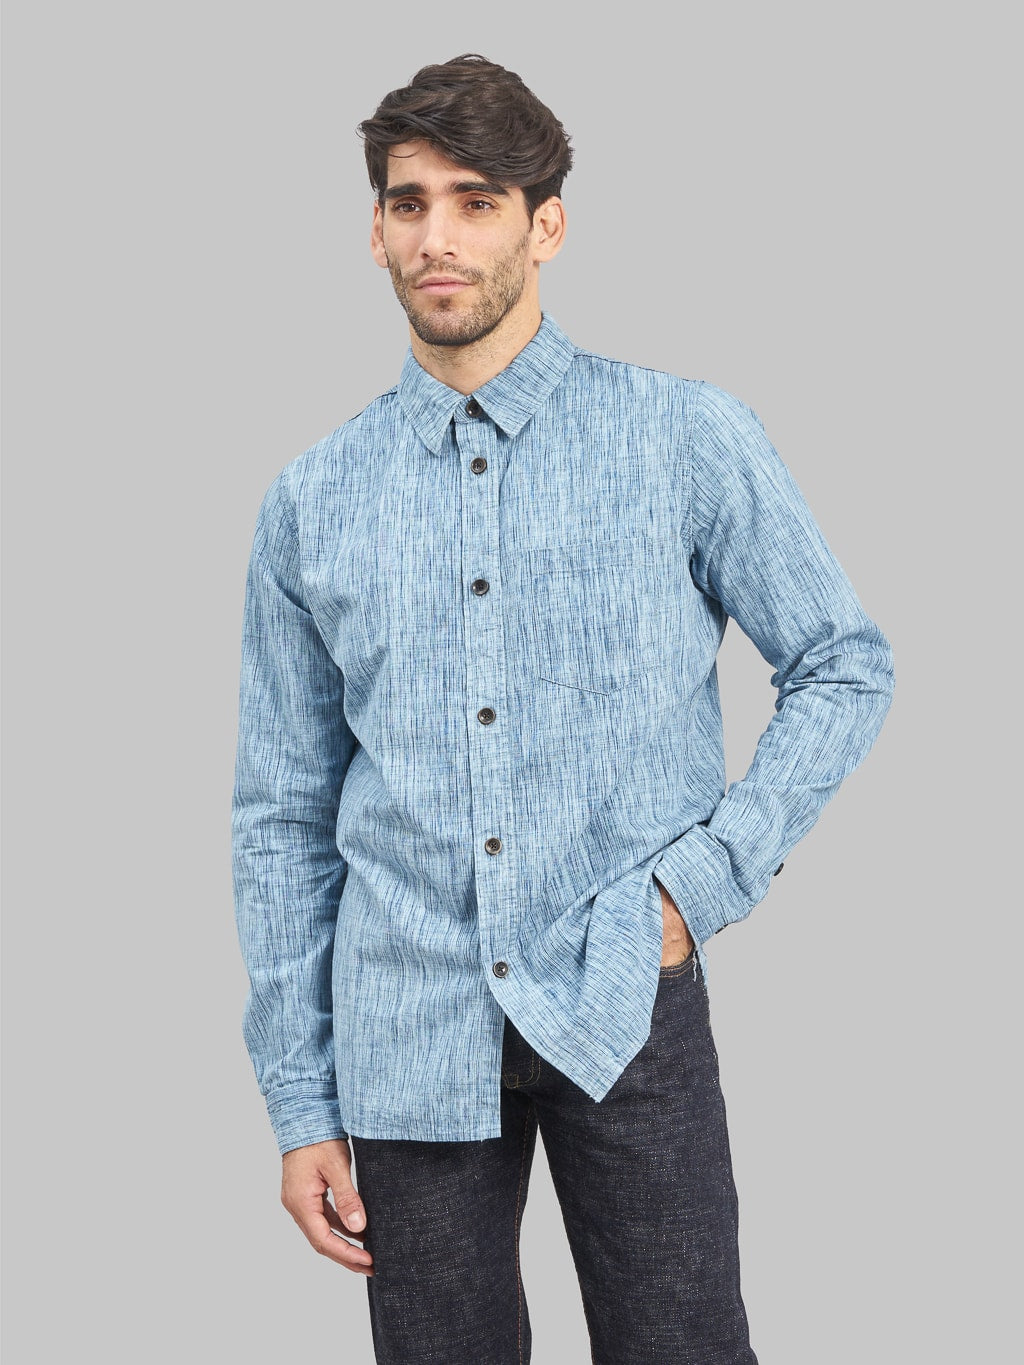 Men's Tall Chambray Button-Down Shirt in Dark Chambray – American Tall